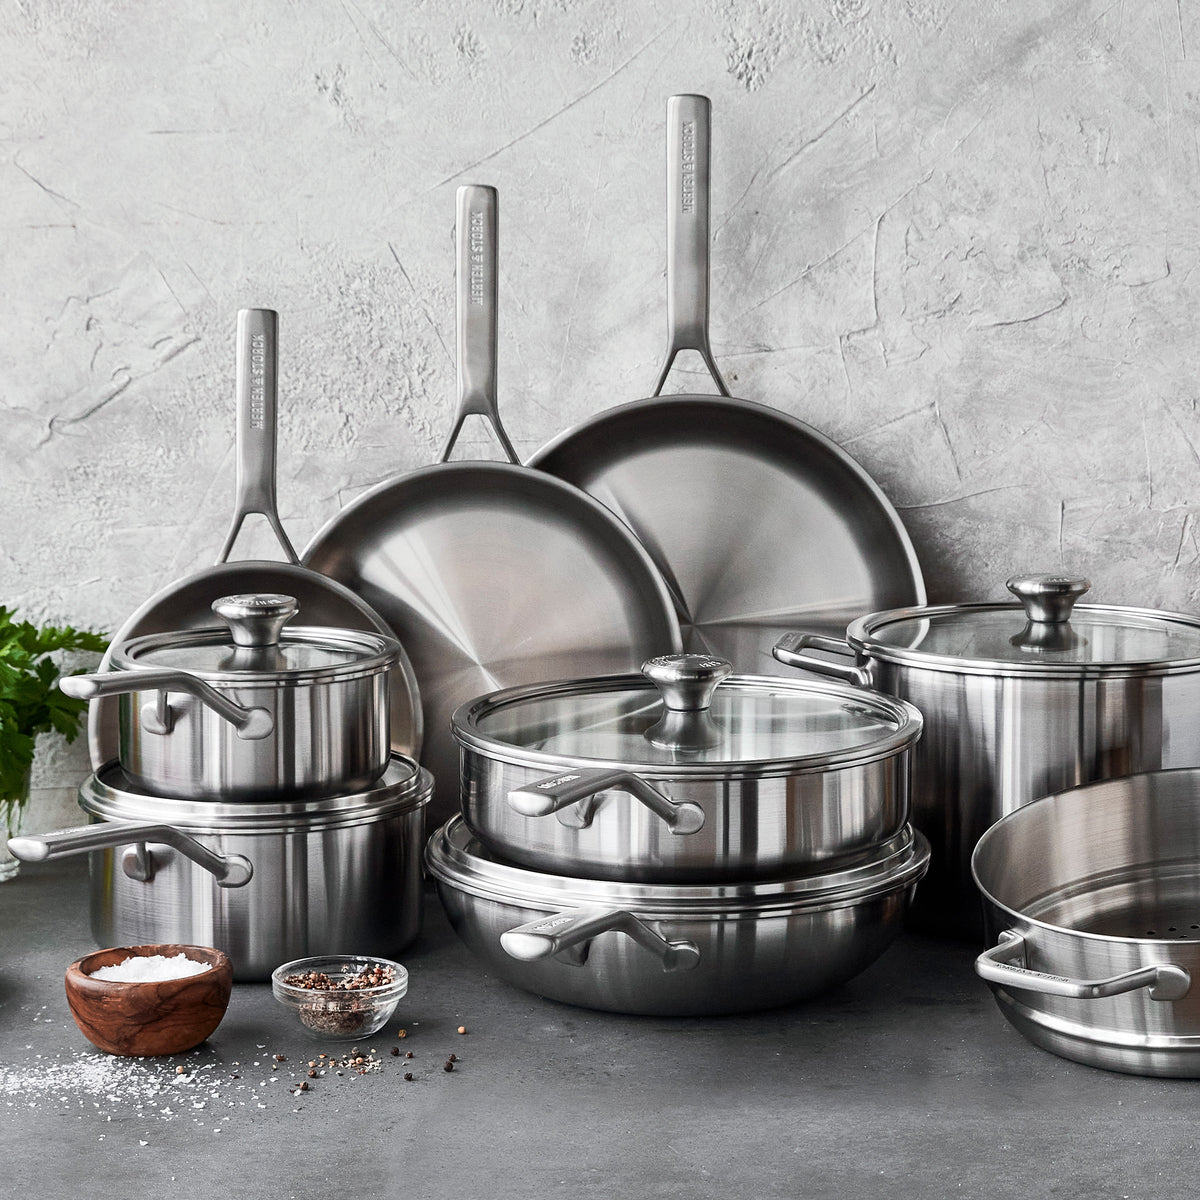 14 piece stainless steel cookware set arranged on a stone countertop with spices.